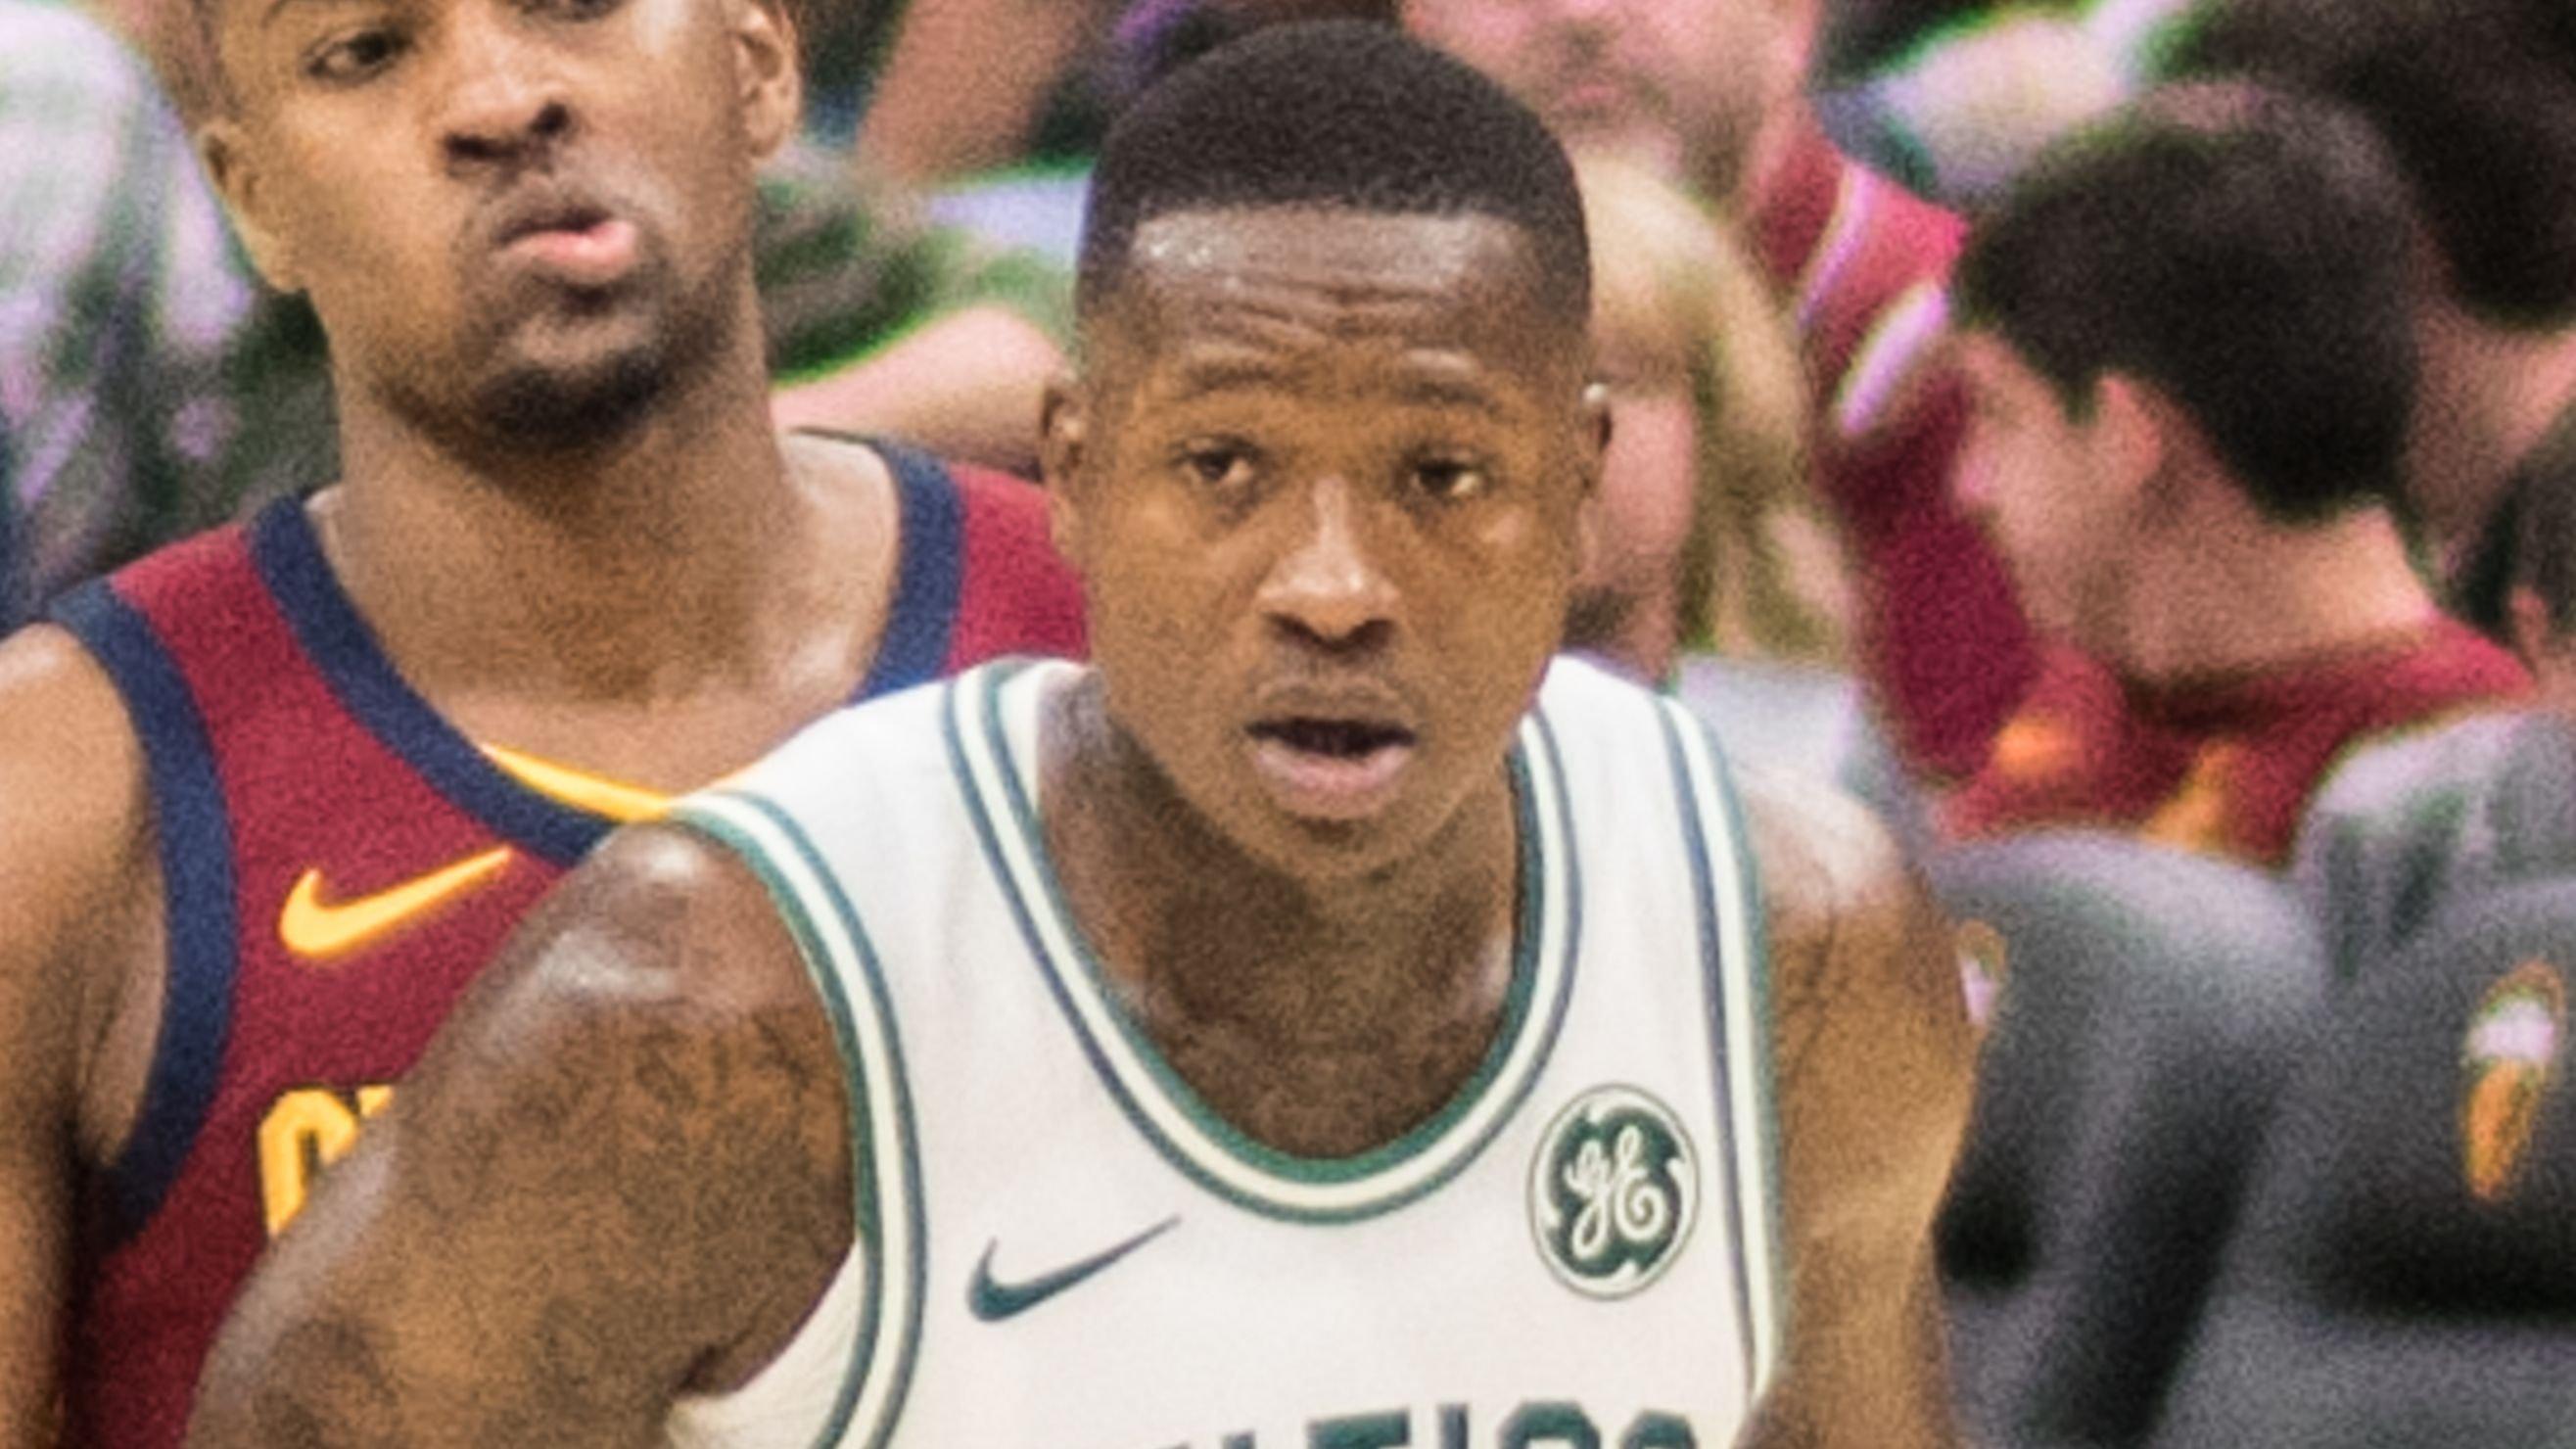 Terry Rozier listening to ref's call